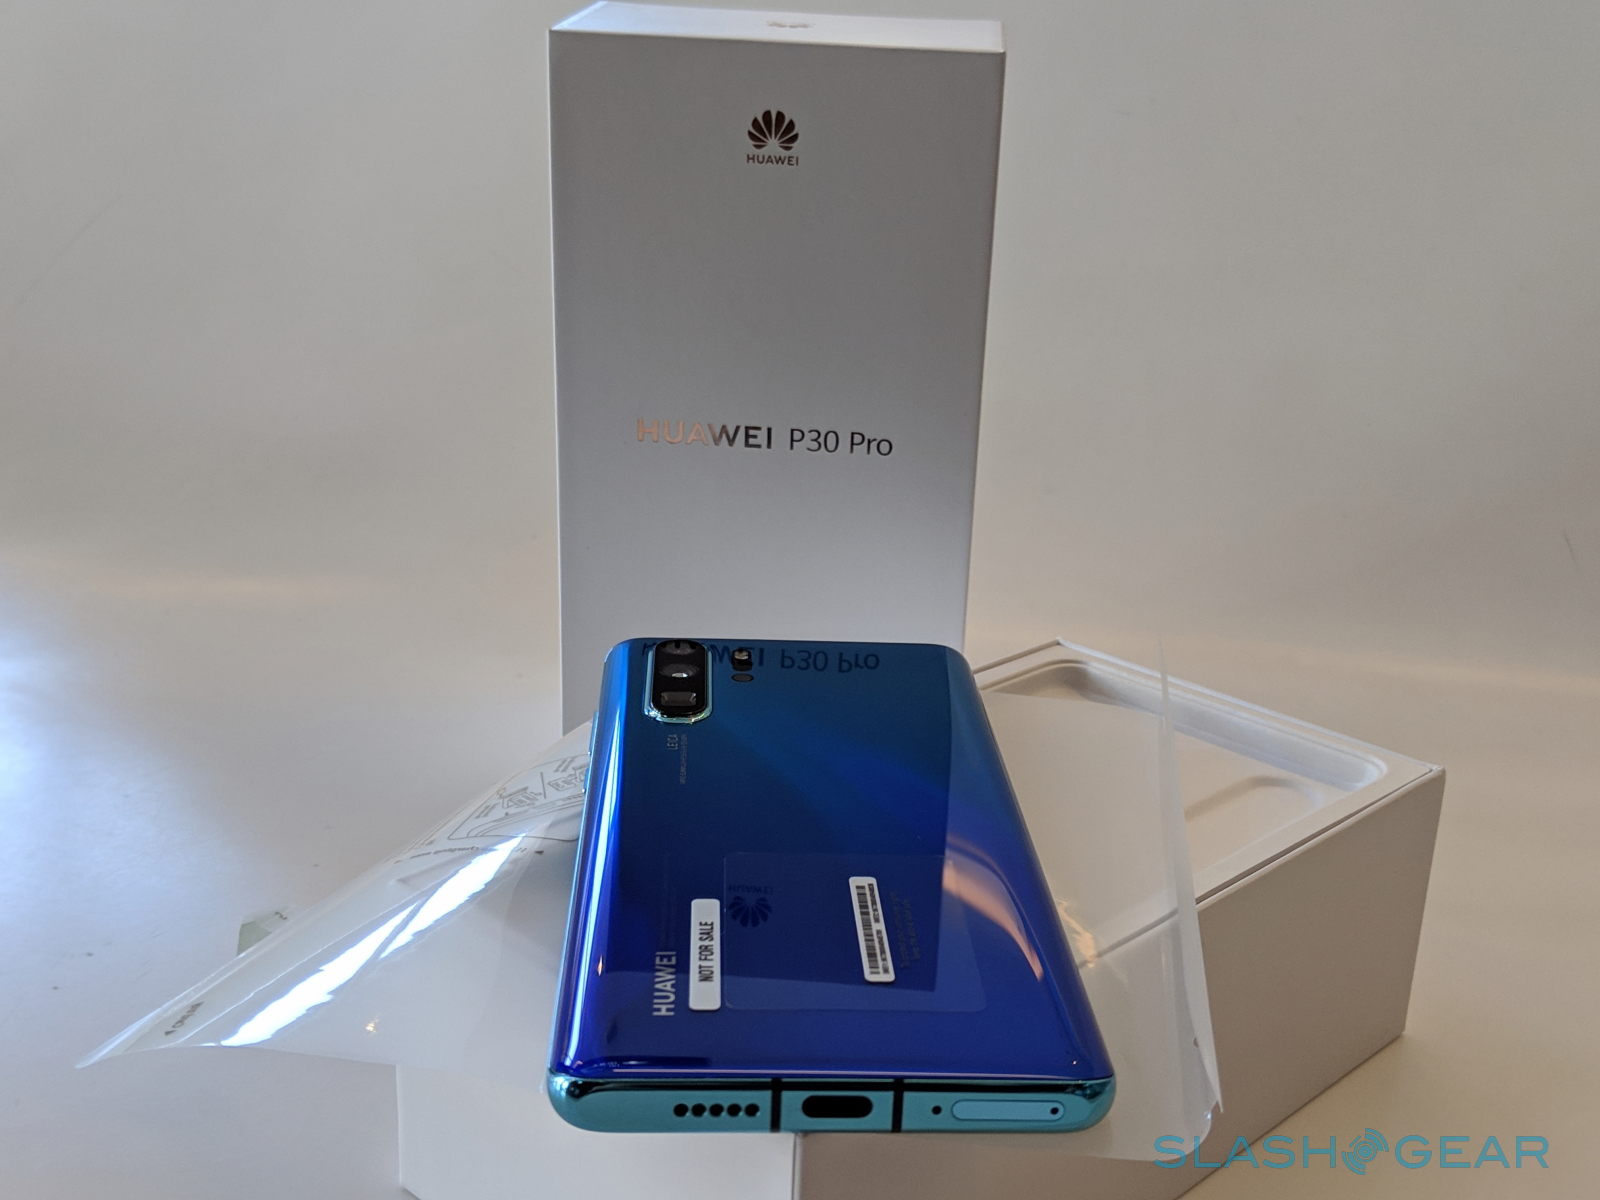 Huawei new edition. Huawei p30 Pro New Edition. Huawei p30 Pro коробка. Huawei p30 Pro комплектация. Huawei p30 Review.